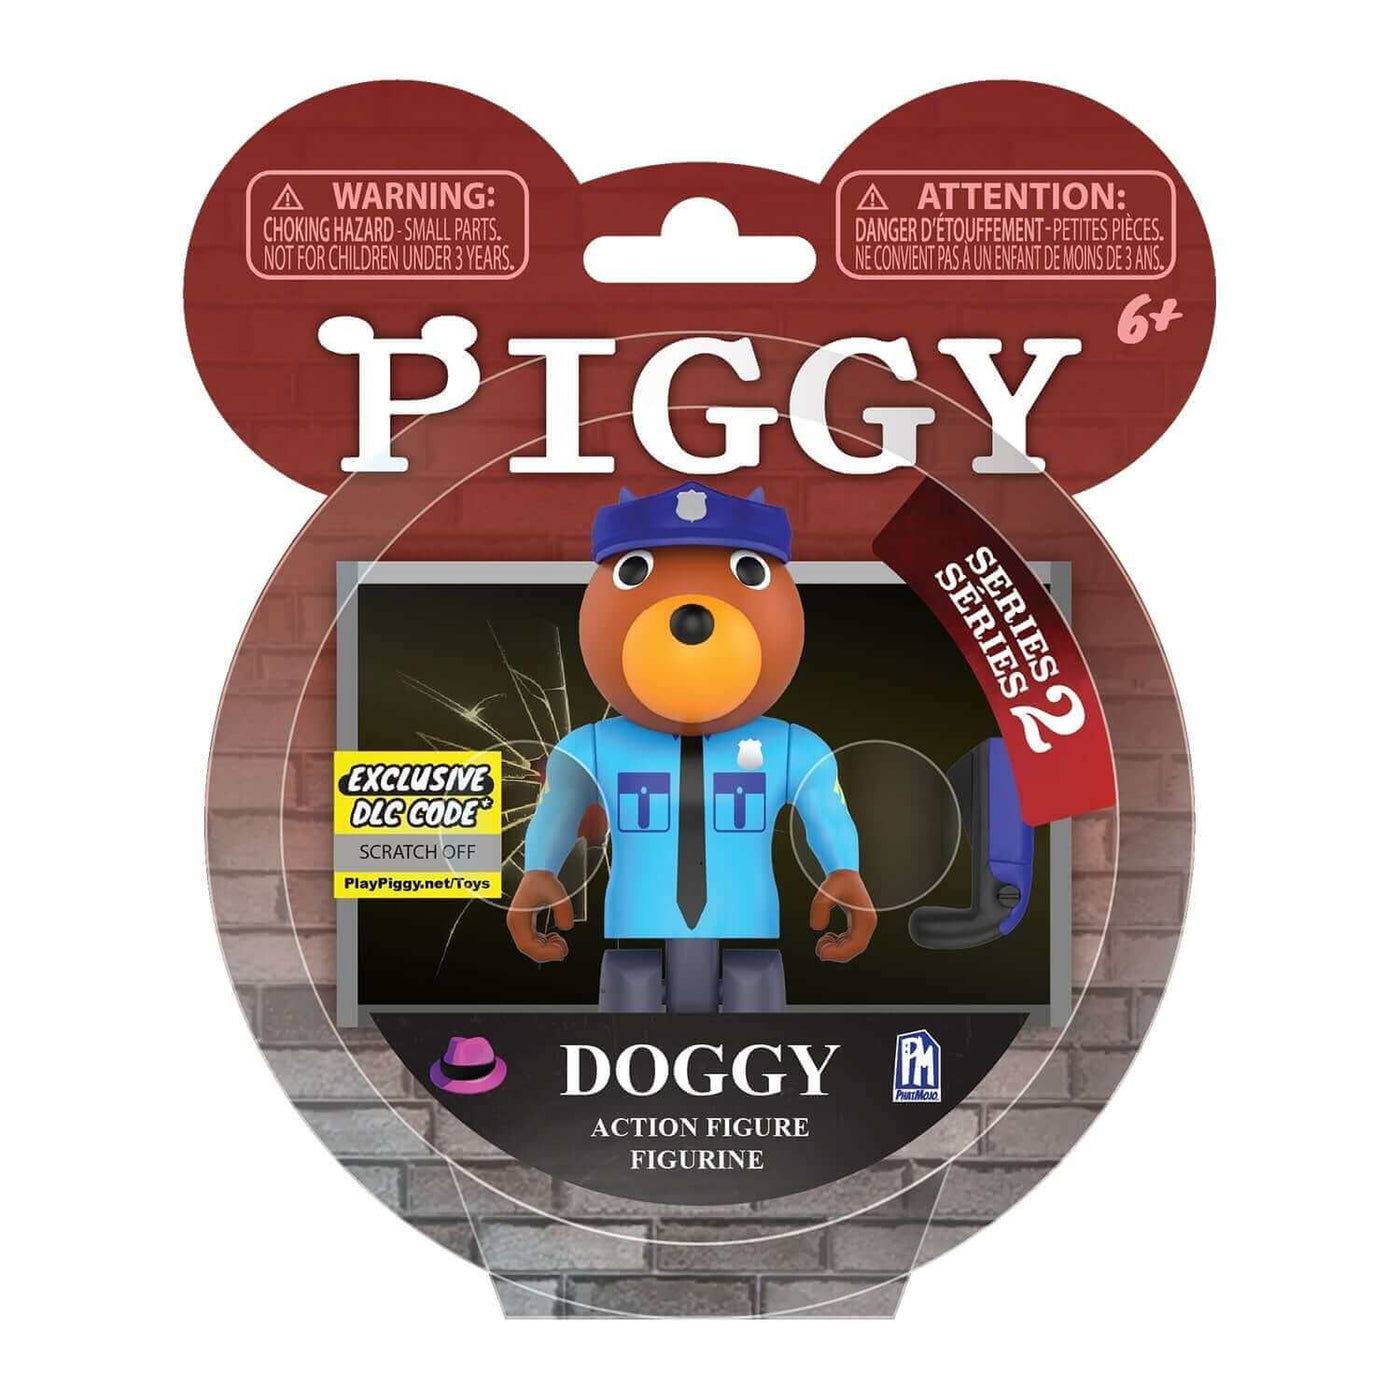 PhatMojo Piggy Series 2 3.5" Action Figures Products: Officer Doggy Action Figures Earthlets